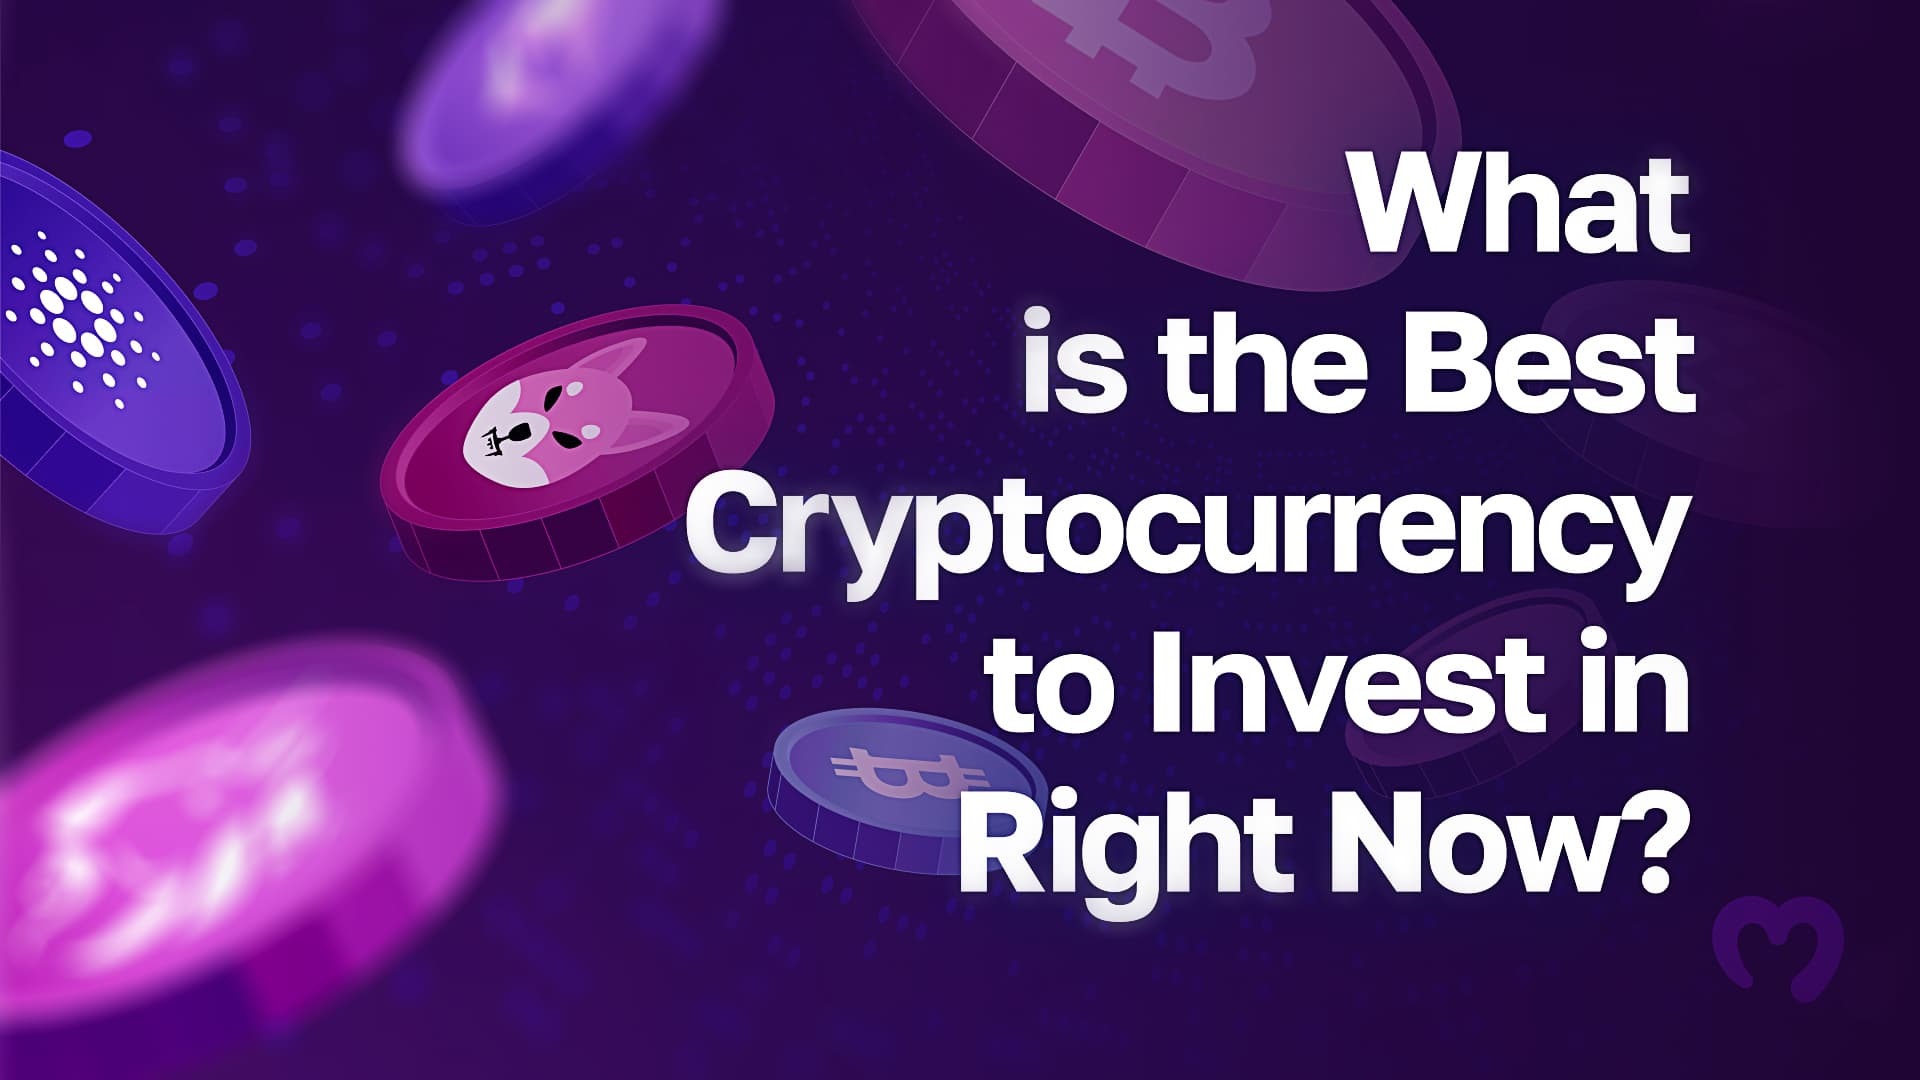 What is the Best Cryptocurrency to Invest in Right Now?